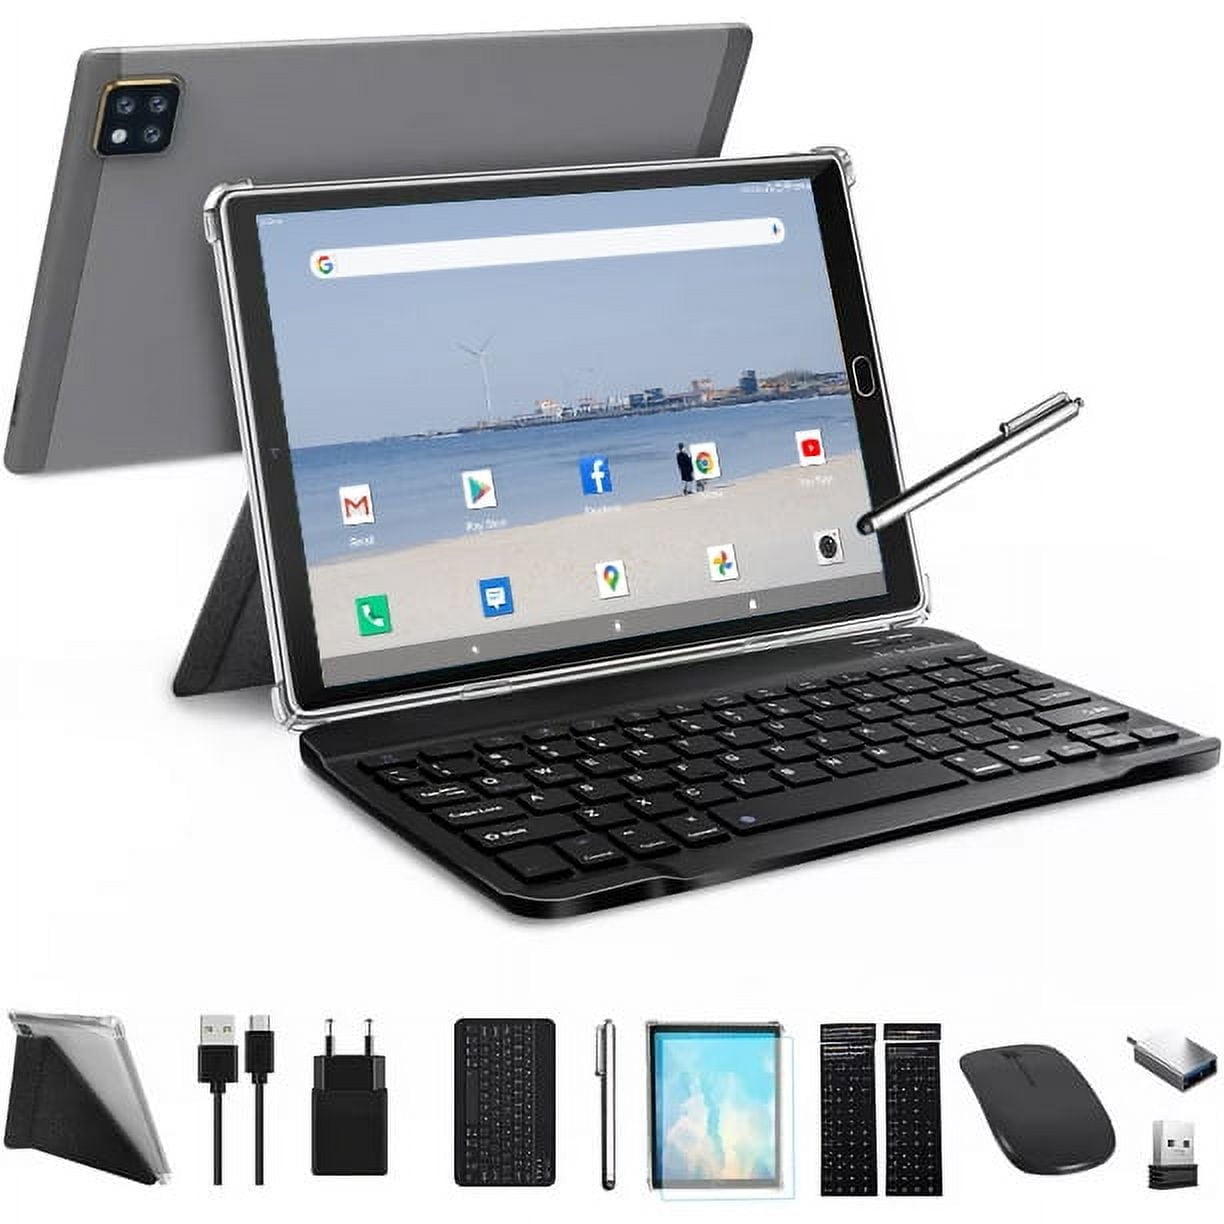 Android 11 Tablet 10 inch with Keyboard Mouse 5G Wifi Tablet Quad Core Arm  4GB Ram 64GB Rom Touch Screen Bluetooth Gps 